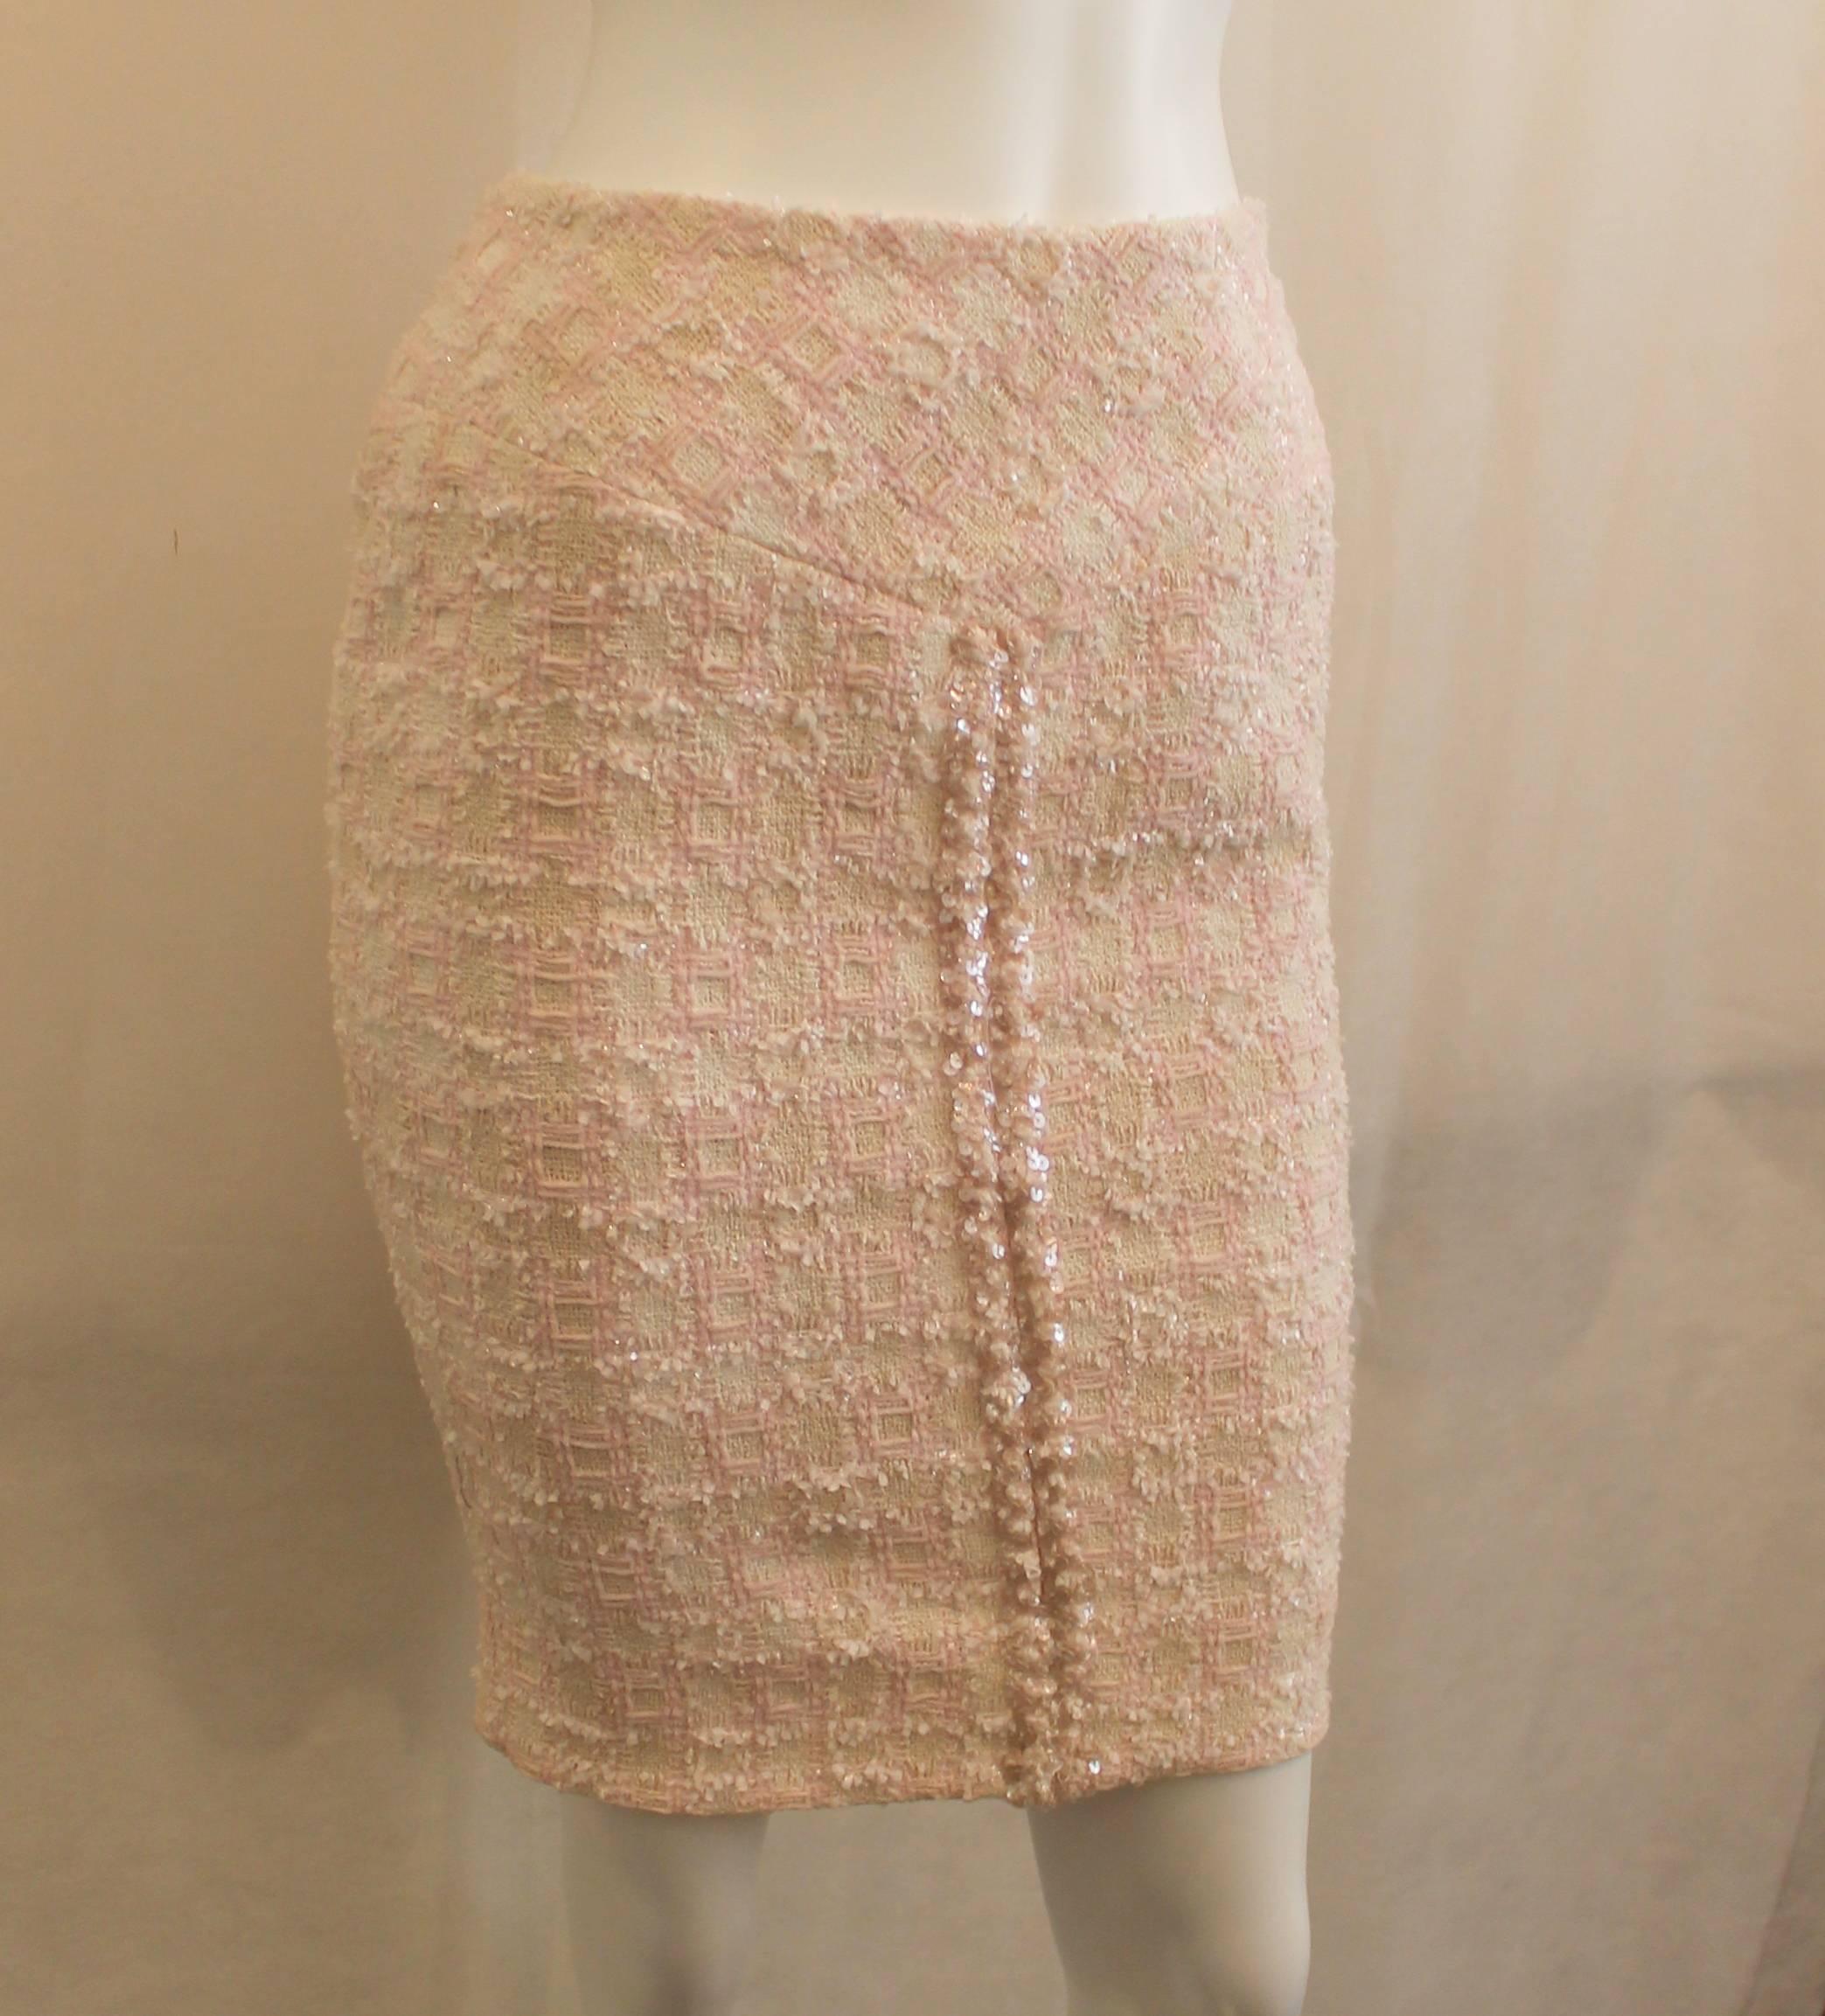 Chanel Pink & Ivory Cotton Blend Tweed Skirt with Sequins - 38 - 95P. This skirt is in excellent condition with a checkered-like tweed pattern and a sequin front strip. The tweed also has a clear metallic threading in it.  

Measurements:
Waist-